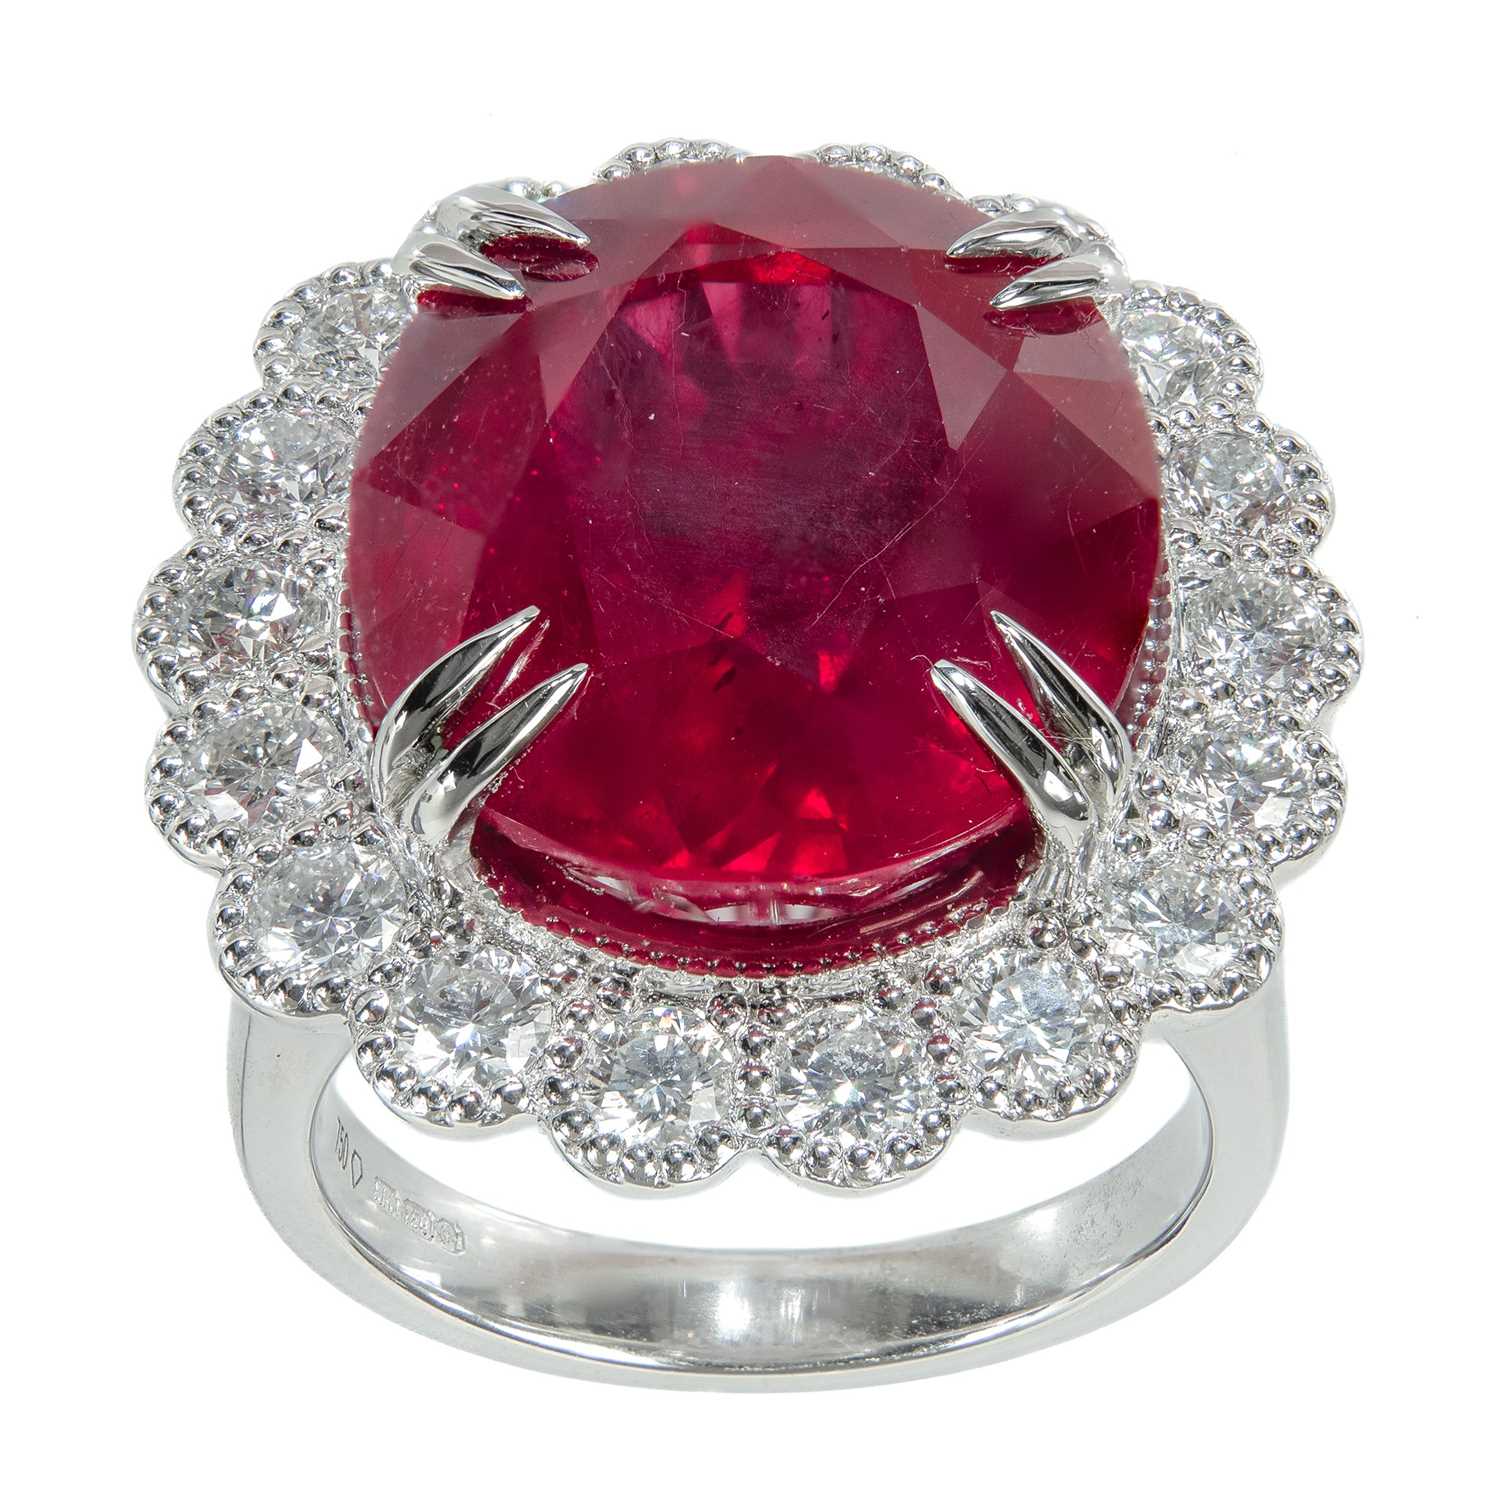 An impressive 18ct white gold, 14.5ct (approx) ruby and diamond cluster dress ring.